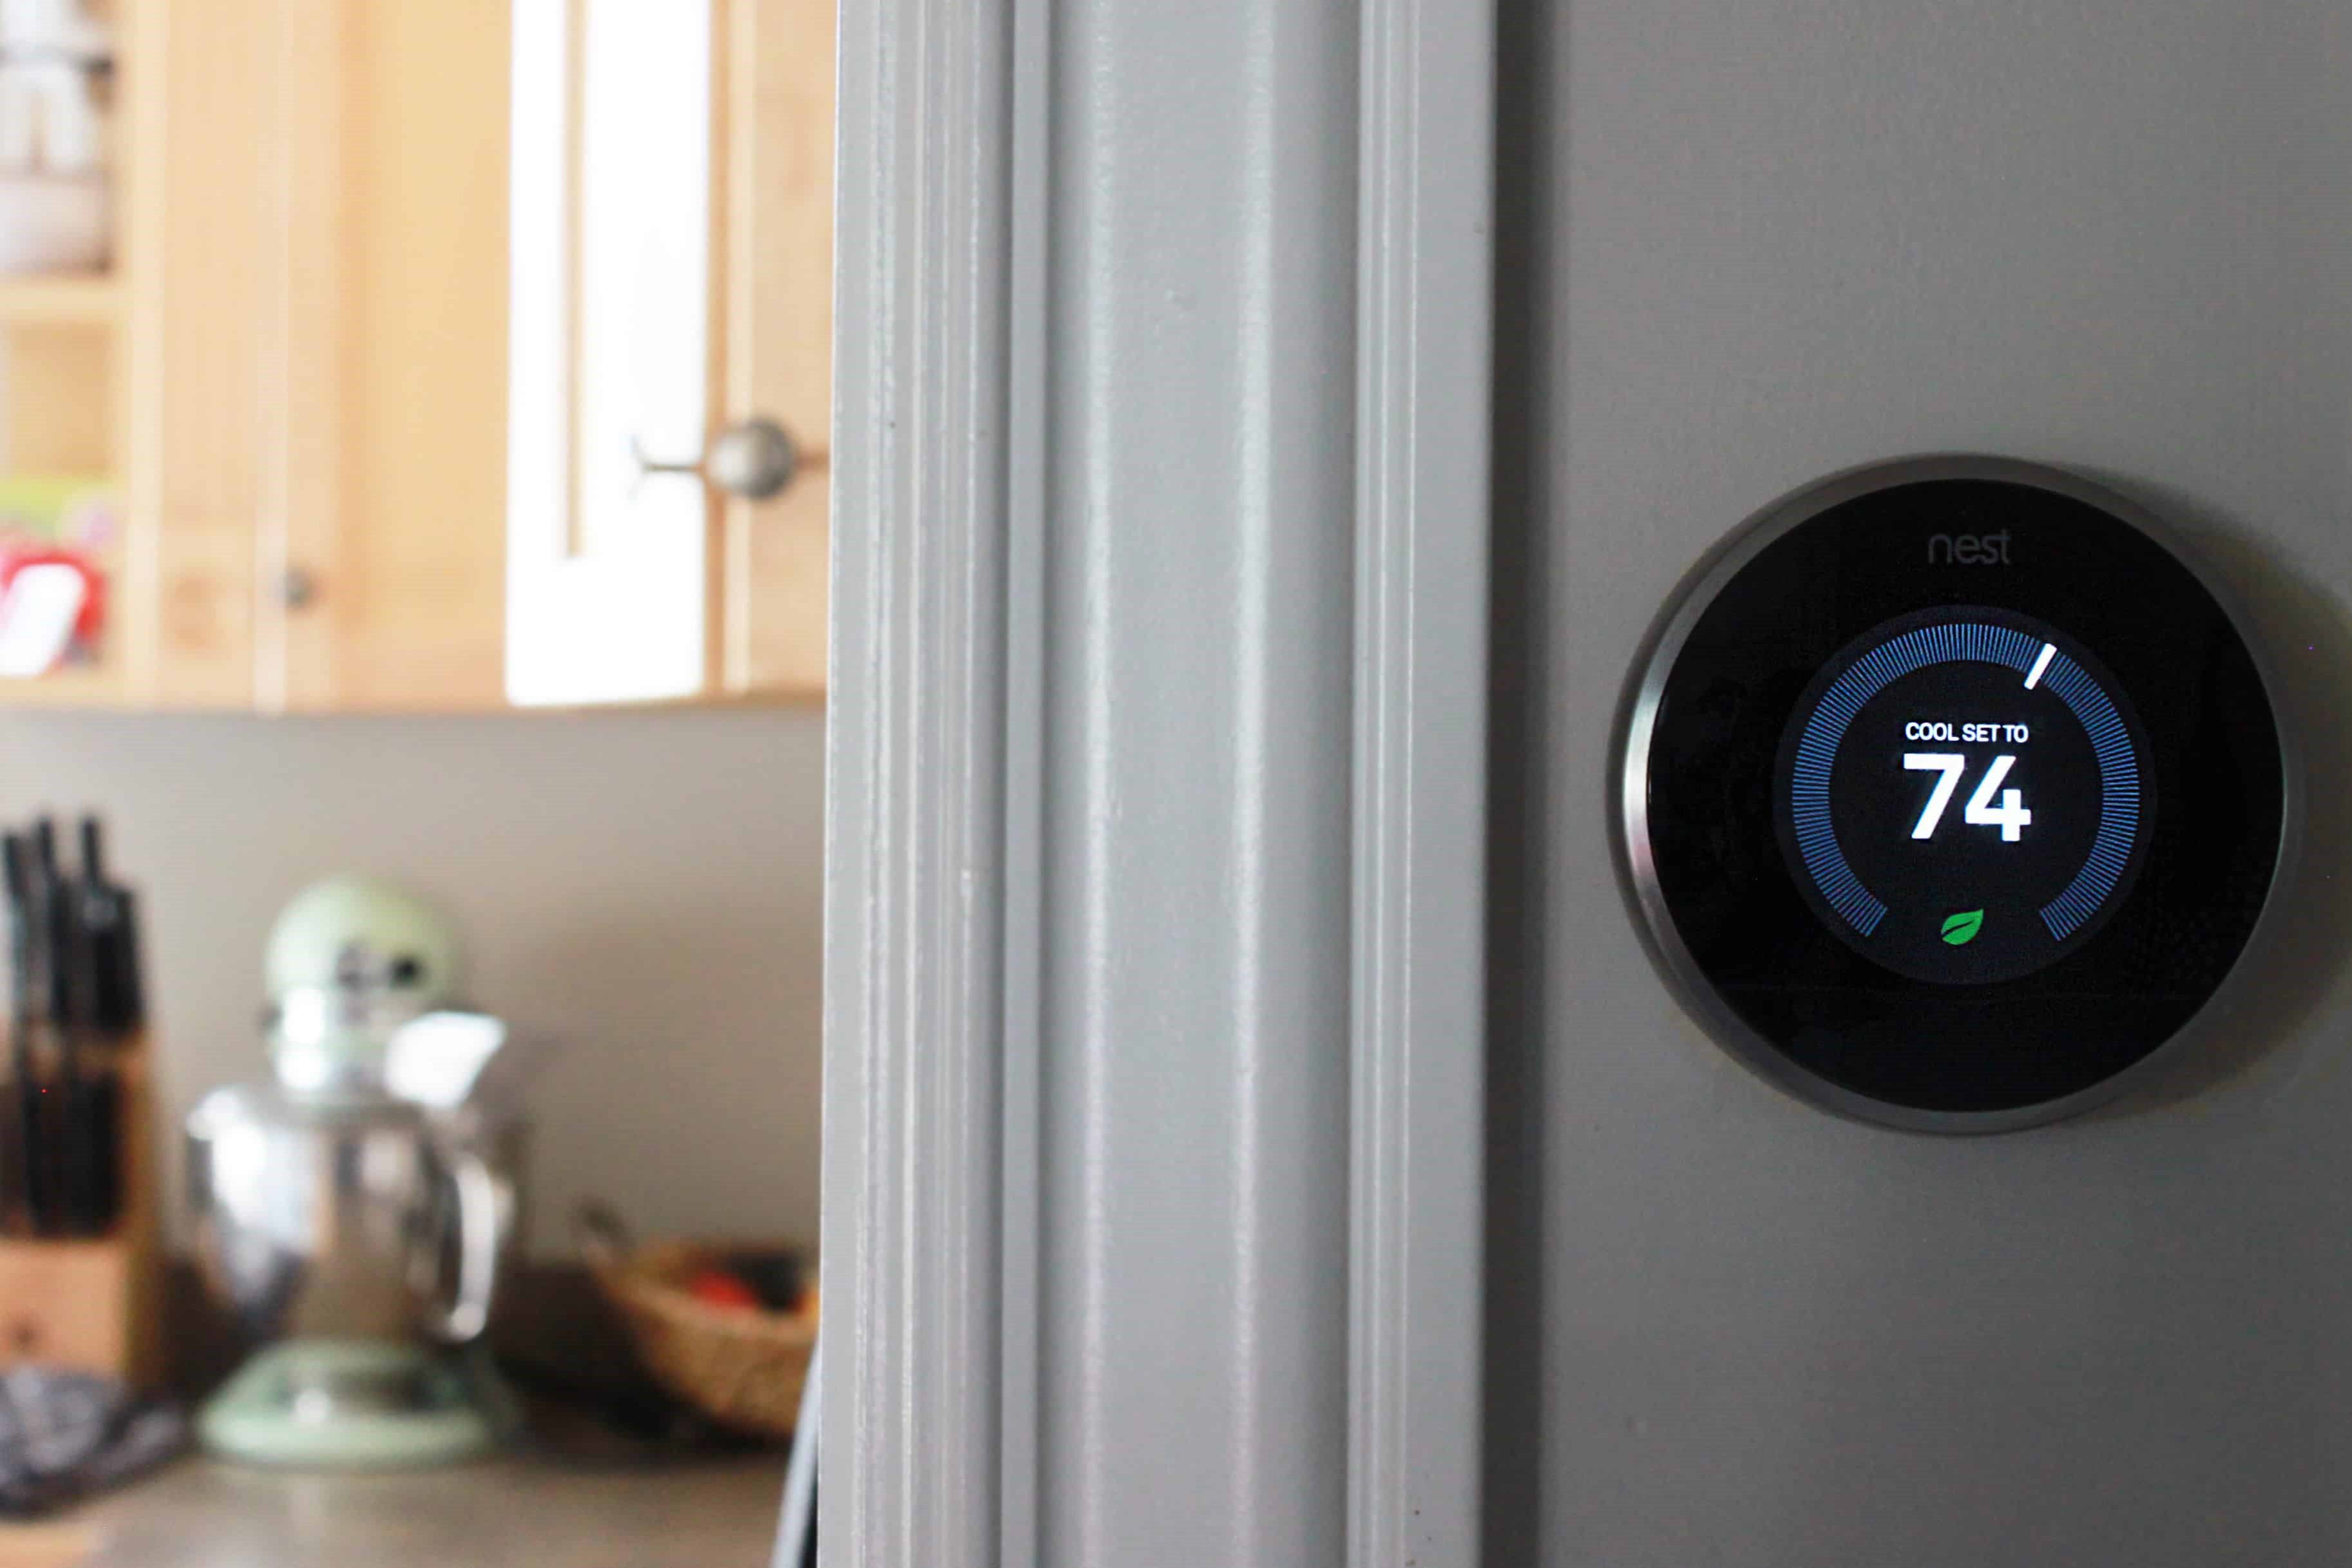 What Does A Nest Thermostat Do